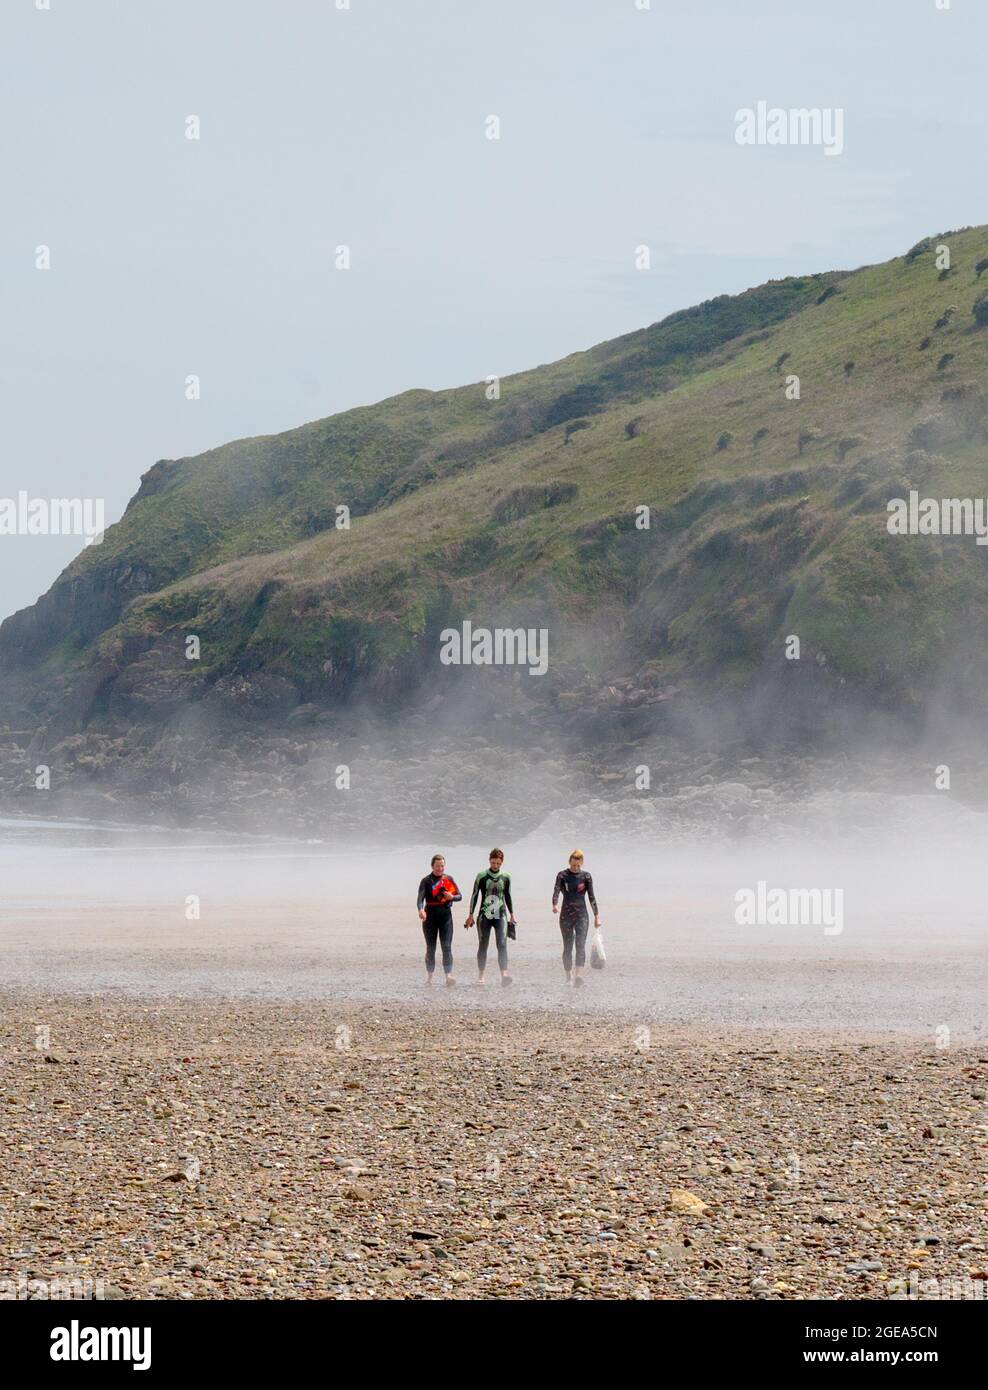 Three women surfers walking on beach at Freshwater East, Pembrokeshire, Wales Stock Photo